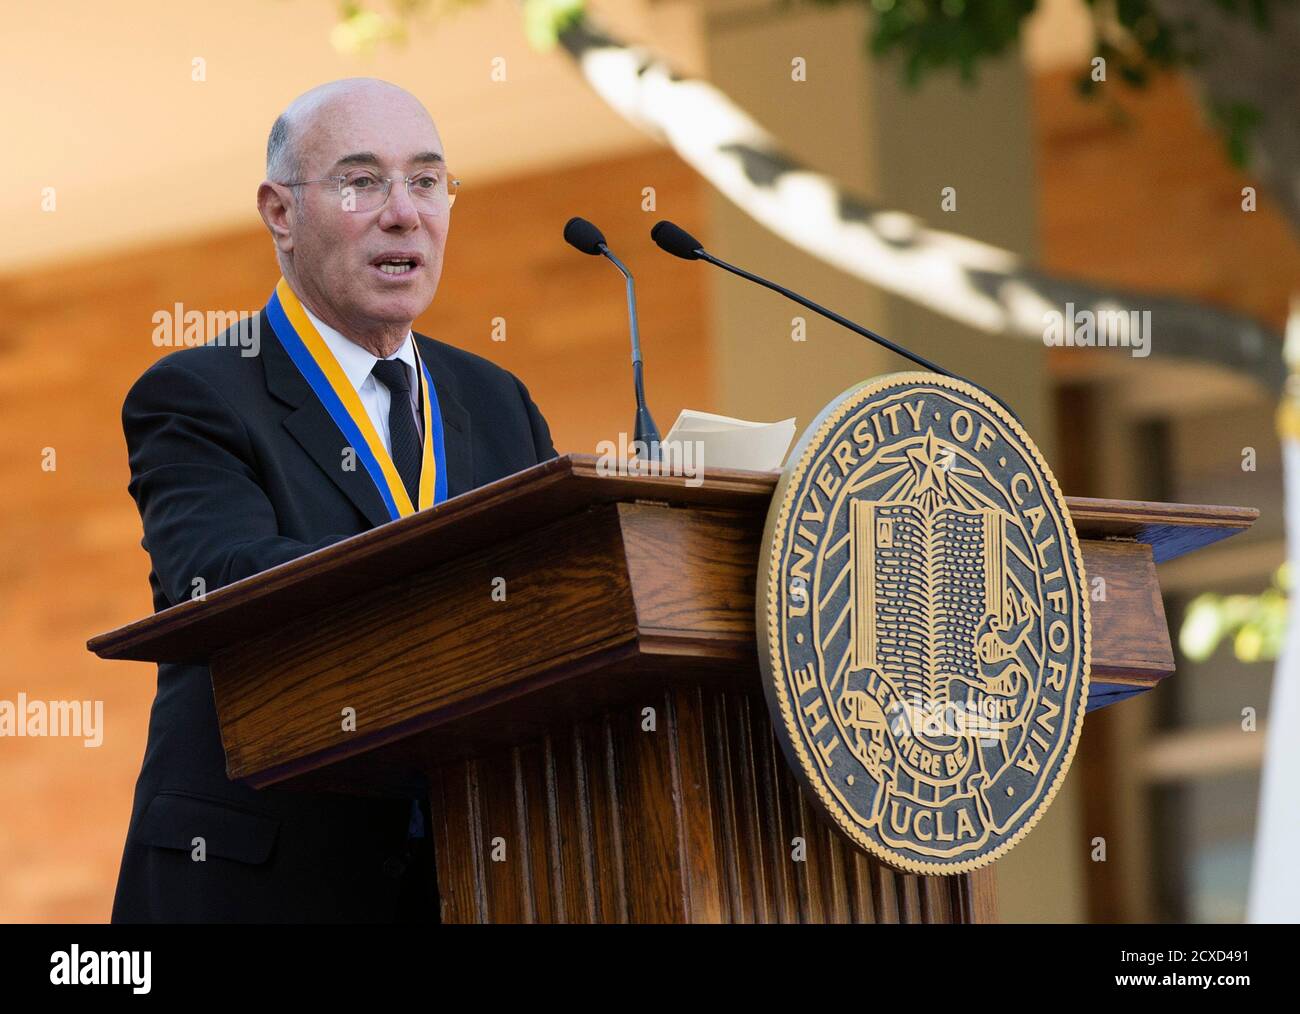 Philanthropist David Geffen speaks to graduates after receiving the UCLA Medal during the David Geffen School of Medicine at UCLA's Hippocratic Oath Ceremony in Los Angeles, California May 30, 2014.  REUTERS/Mario Anzuoni  (UNITED STATES - Tags: ENTERTAINMENT HEALTH EDUCATION PROFILE BUSINESS) Stock Photo